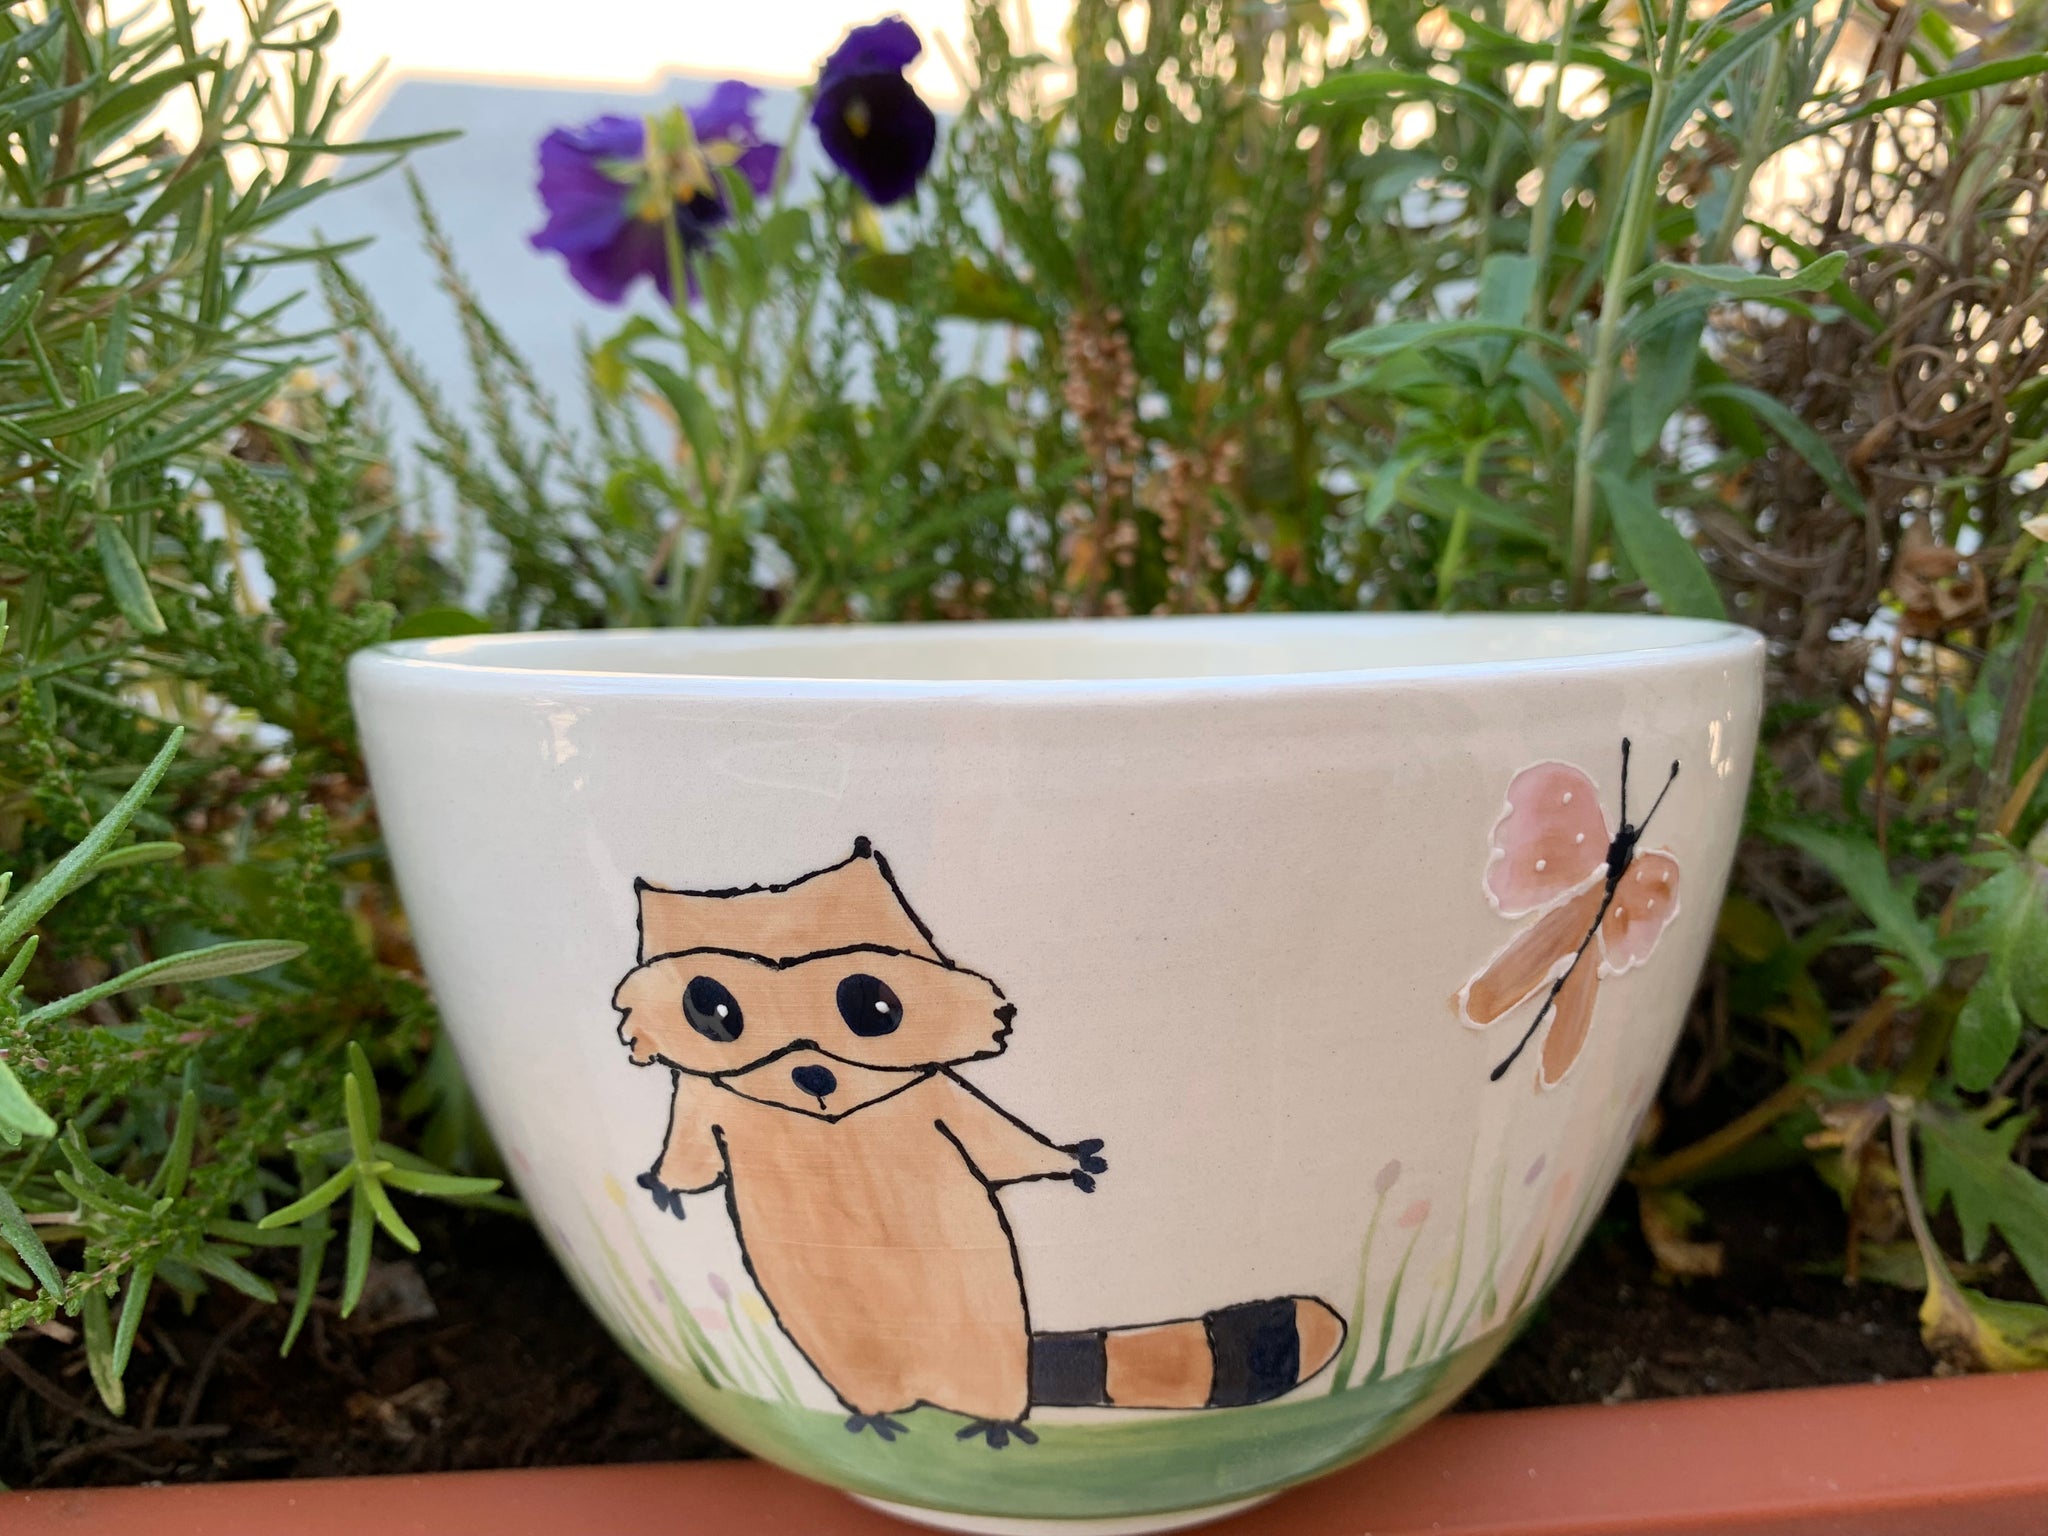 “Busted racoon” Extra large cereal bowl